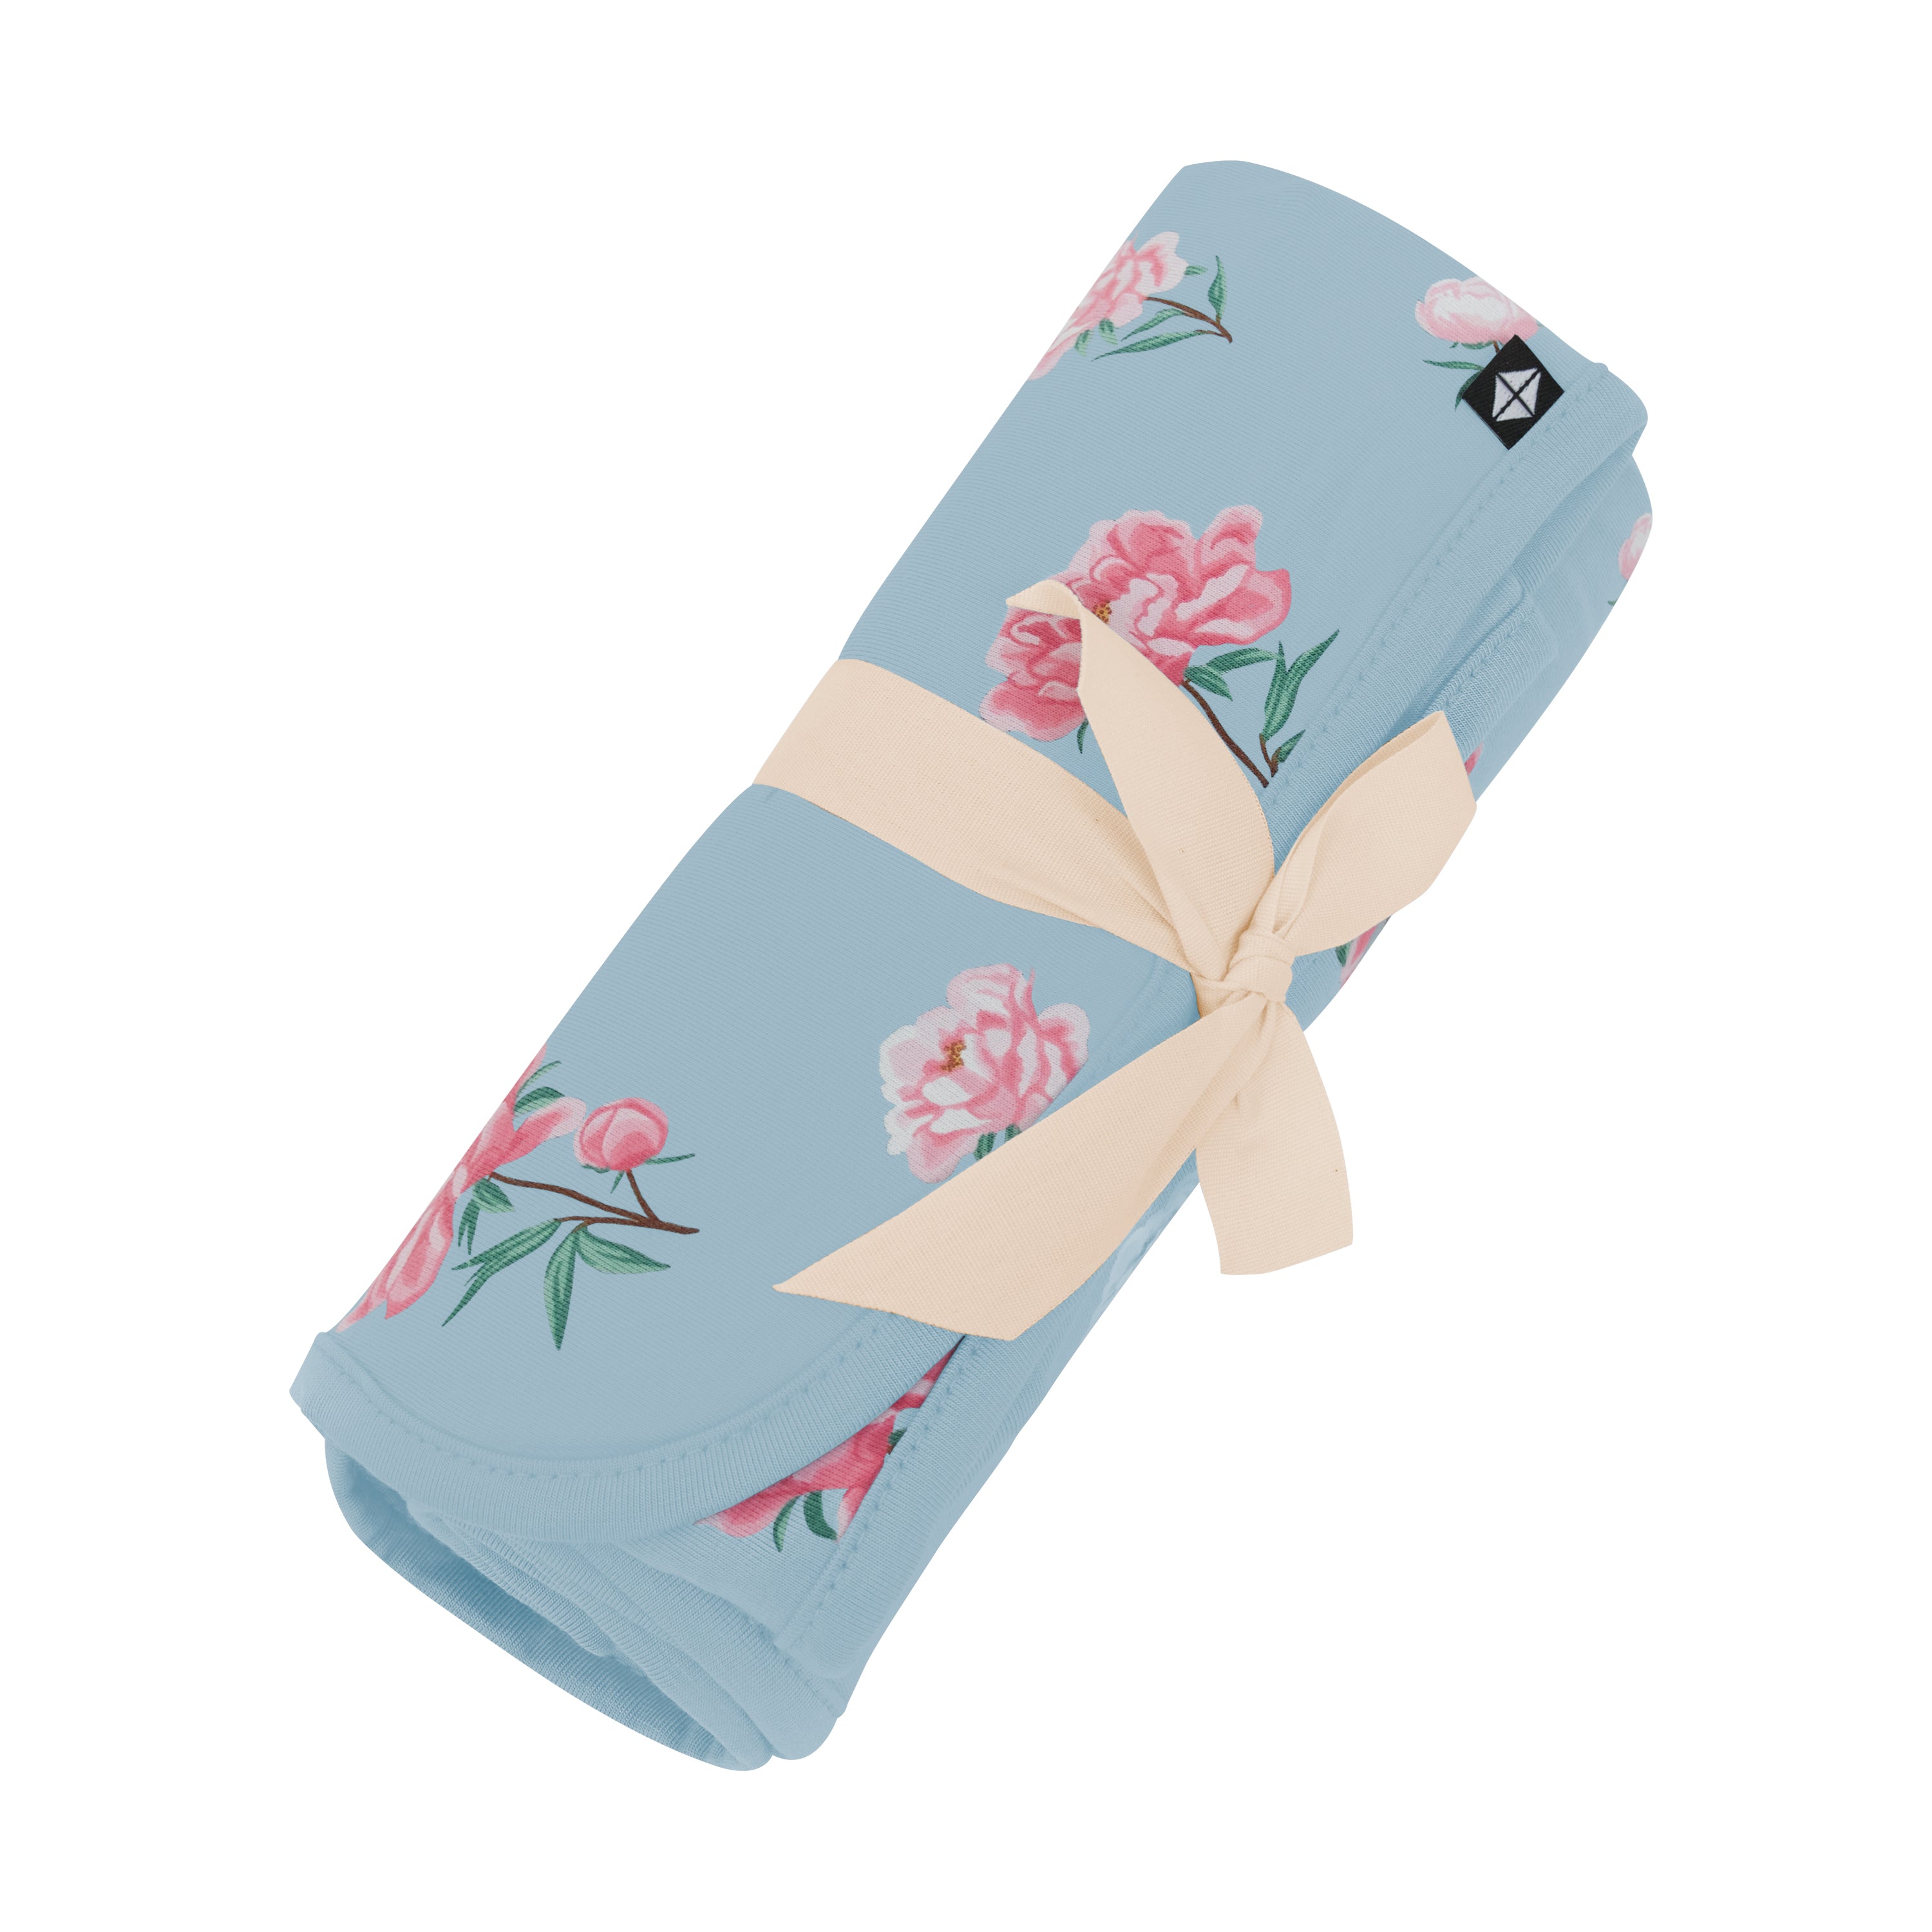 Swaddle Blanket in Peony